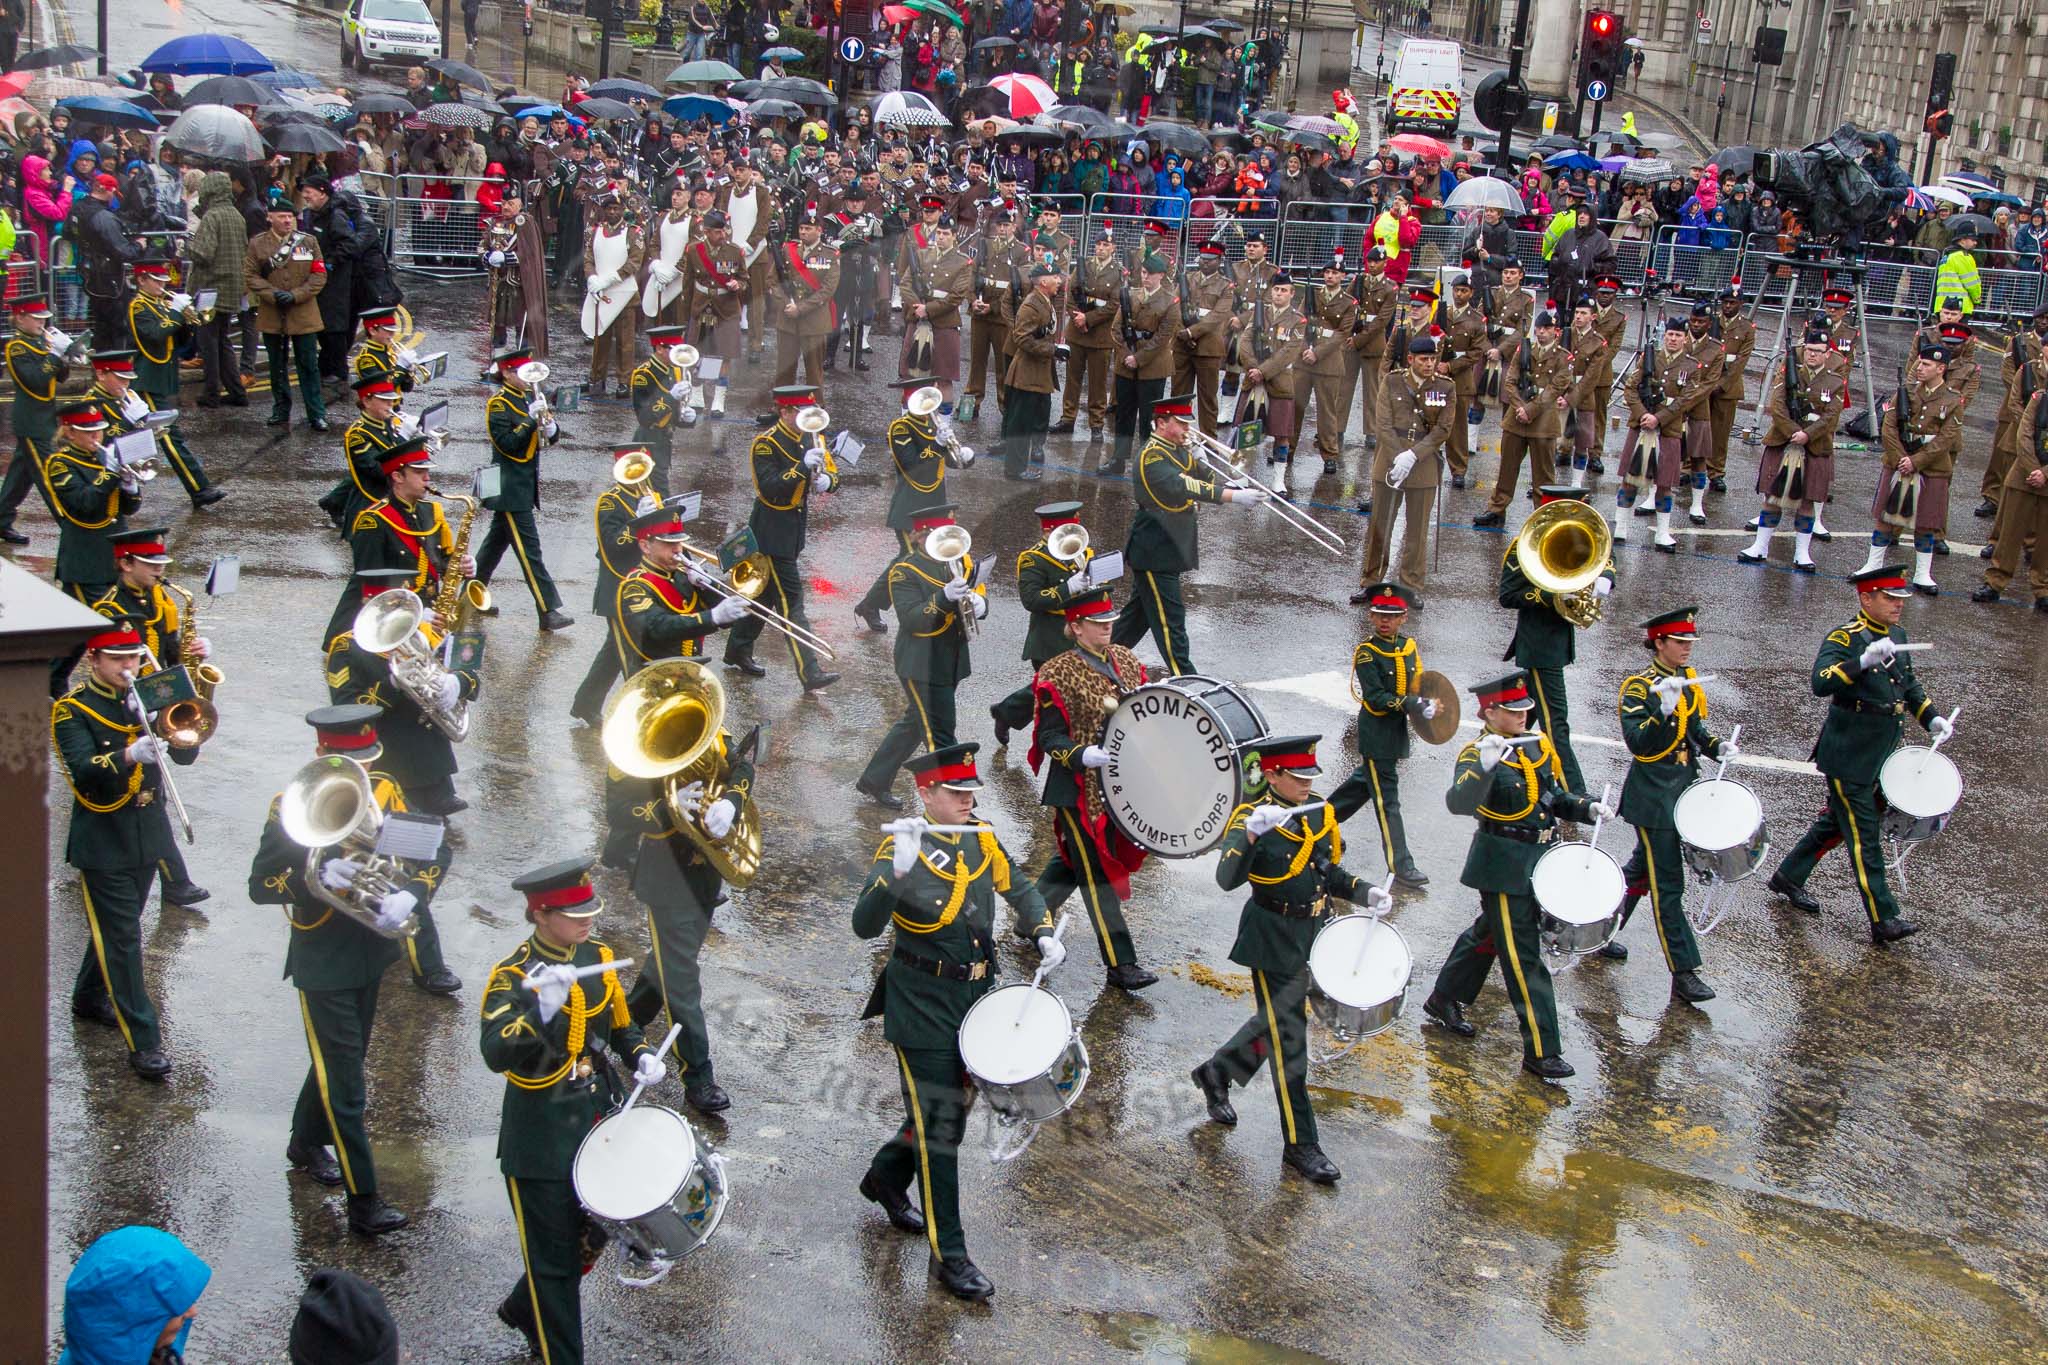 Lord Mayor's Show 2013: 8-Romford Drum & Trumpet Corps has been performing in the Lord Mayor's Show since 1974..
Press stand opposite Mansion House, City of London,
London,
Greater London,
United Kingdom,
on 09 November 2013 at 11:03, image #204